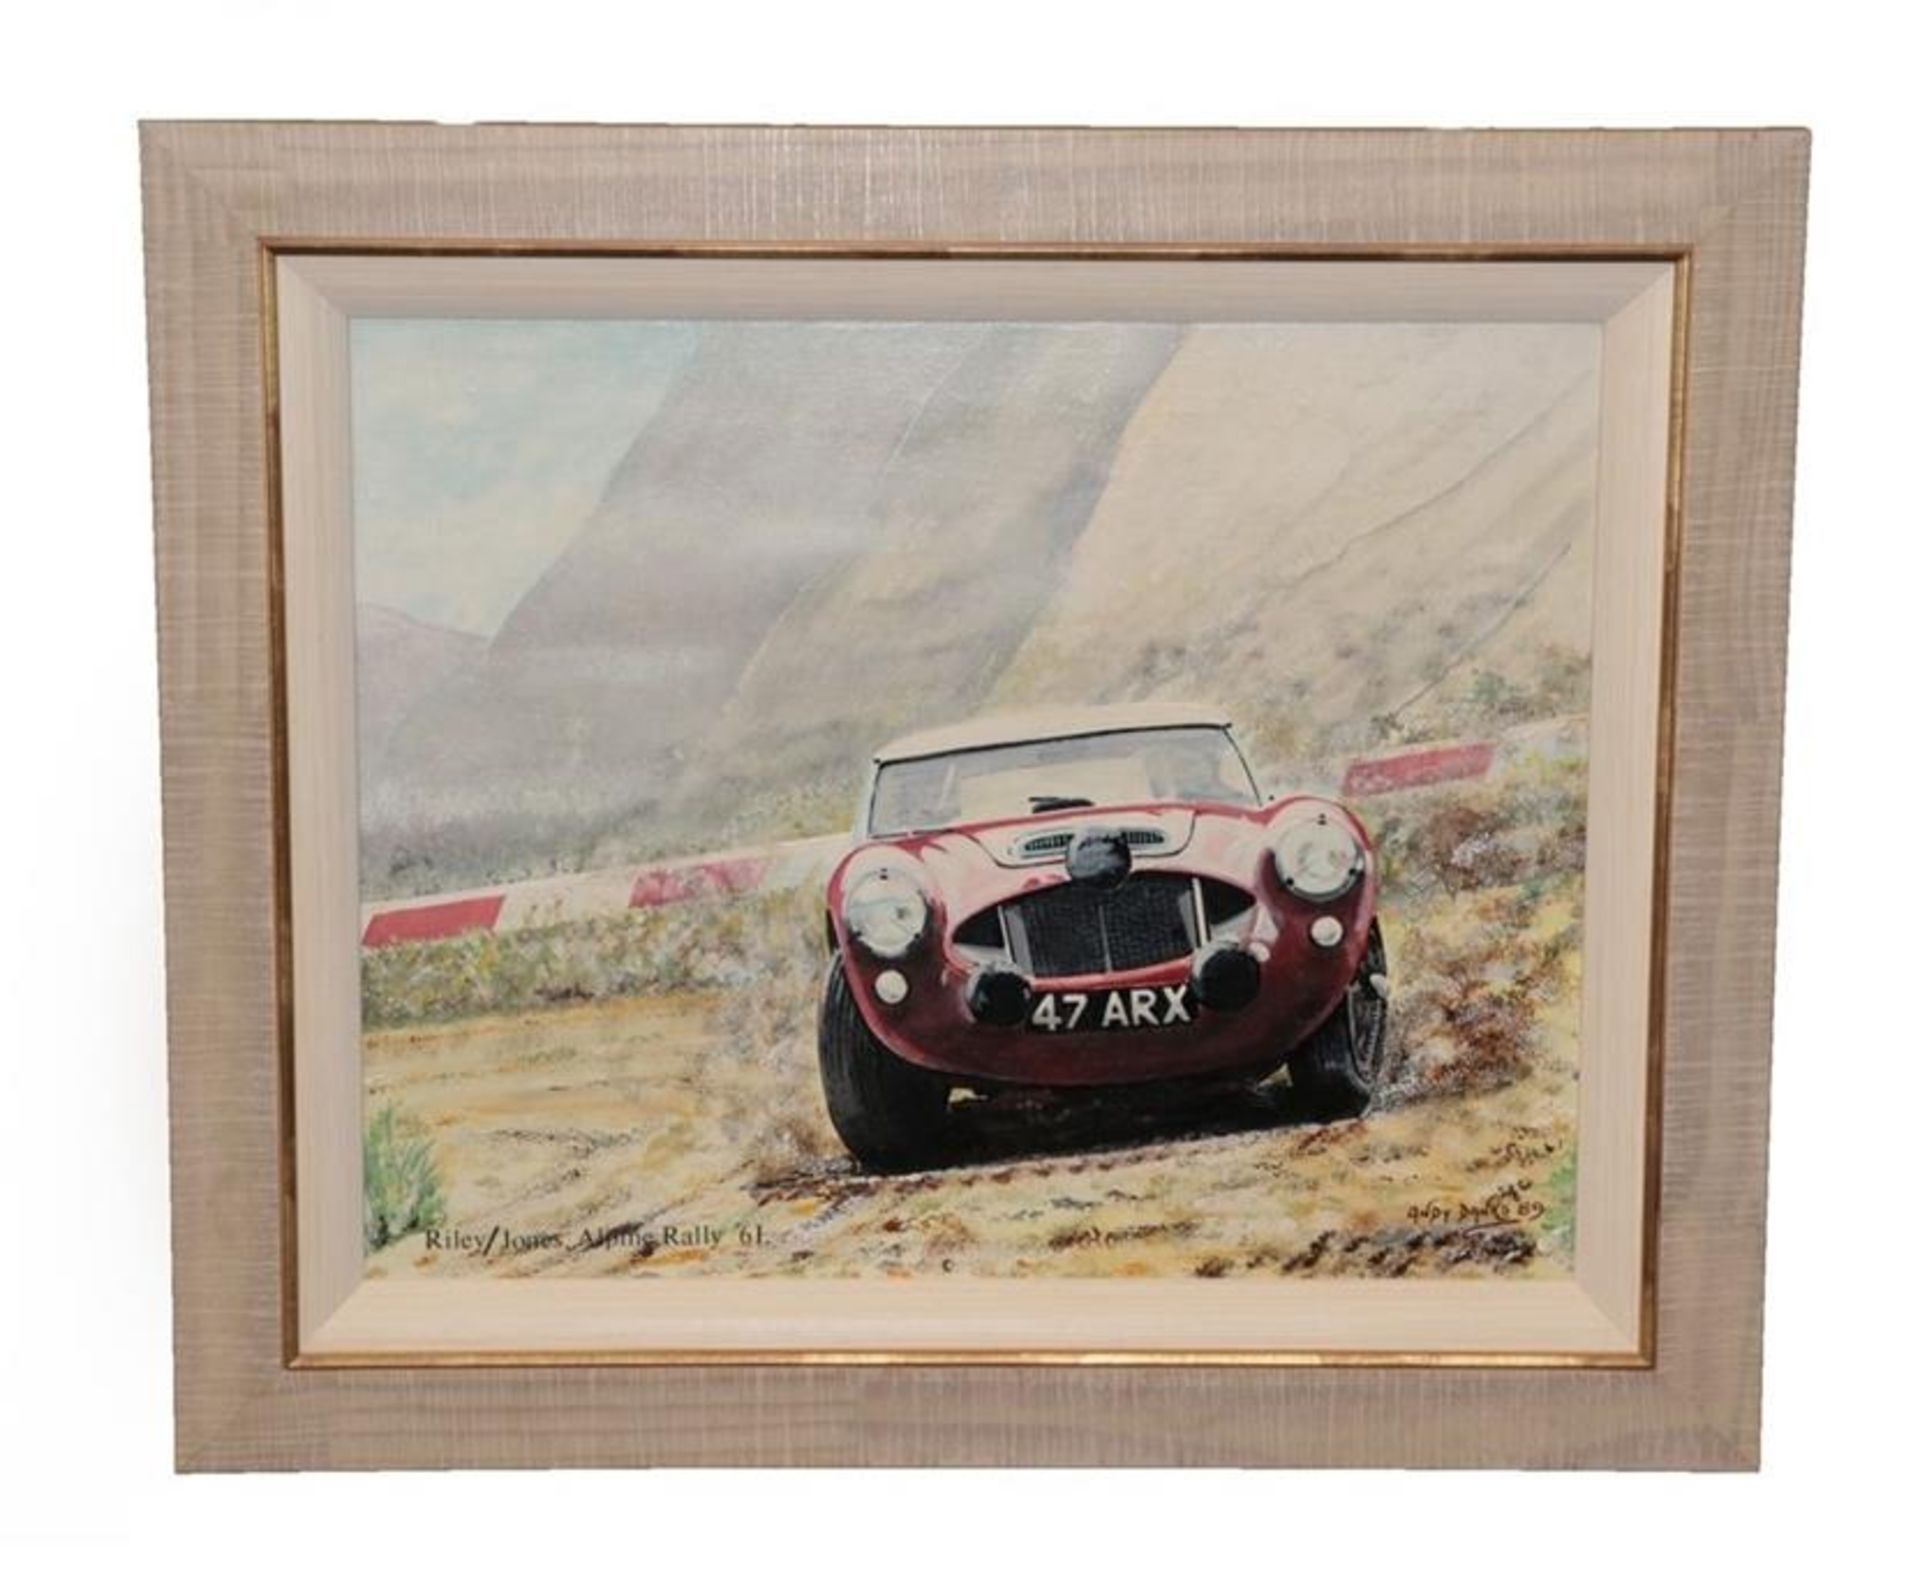 Andy Danks (Contemporary) Rally/Jones Alpine Rally 1961 car registration 47 ARX JMP Signed and dated